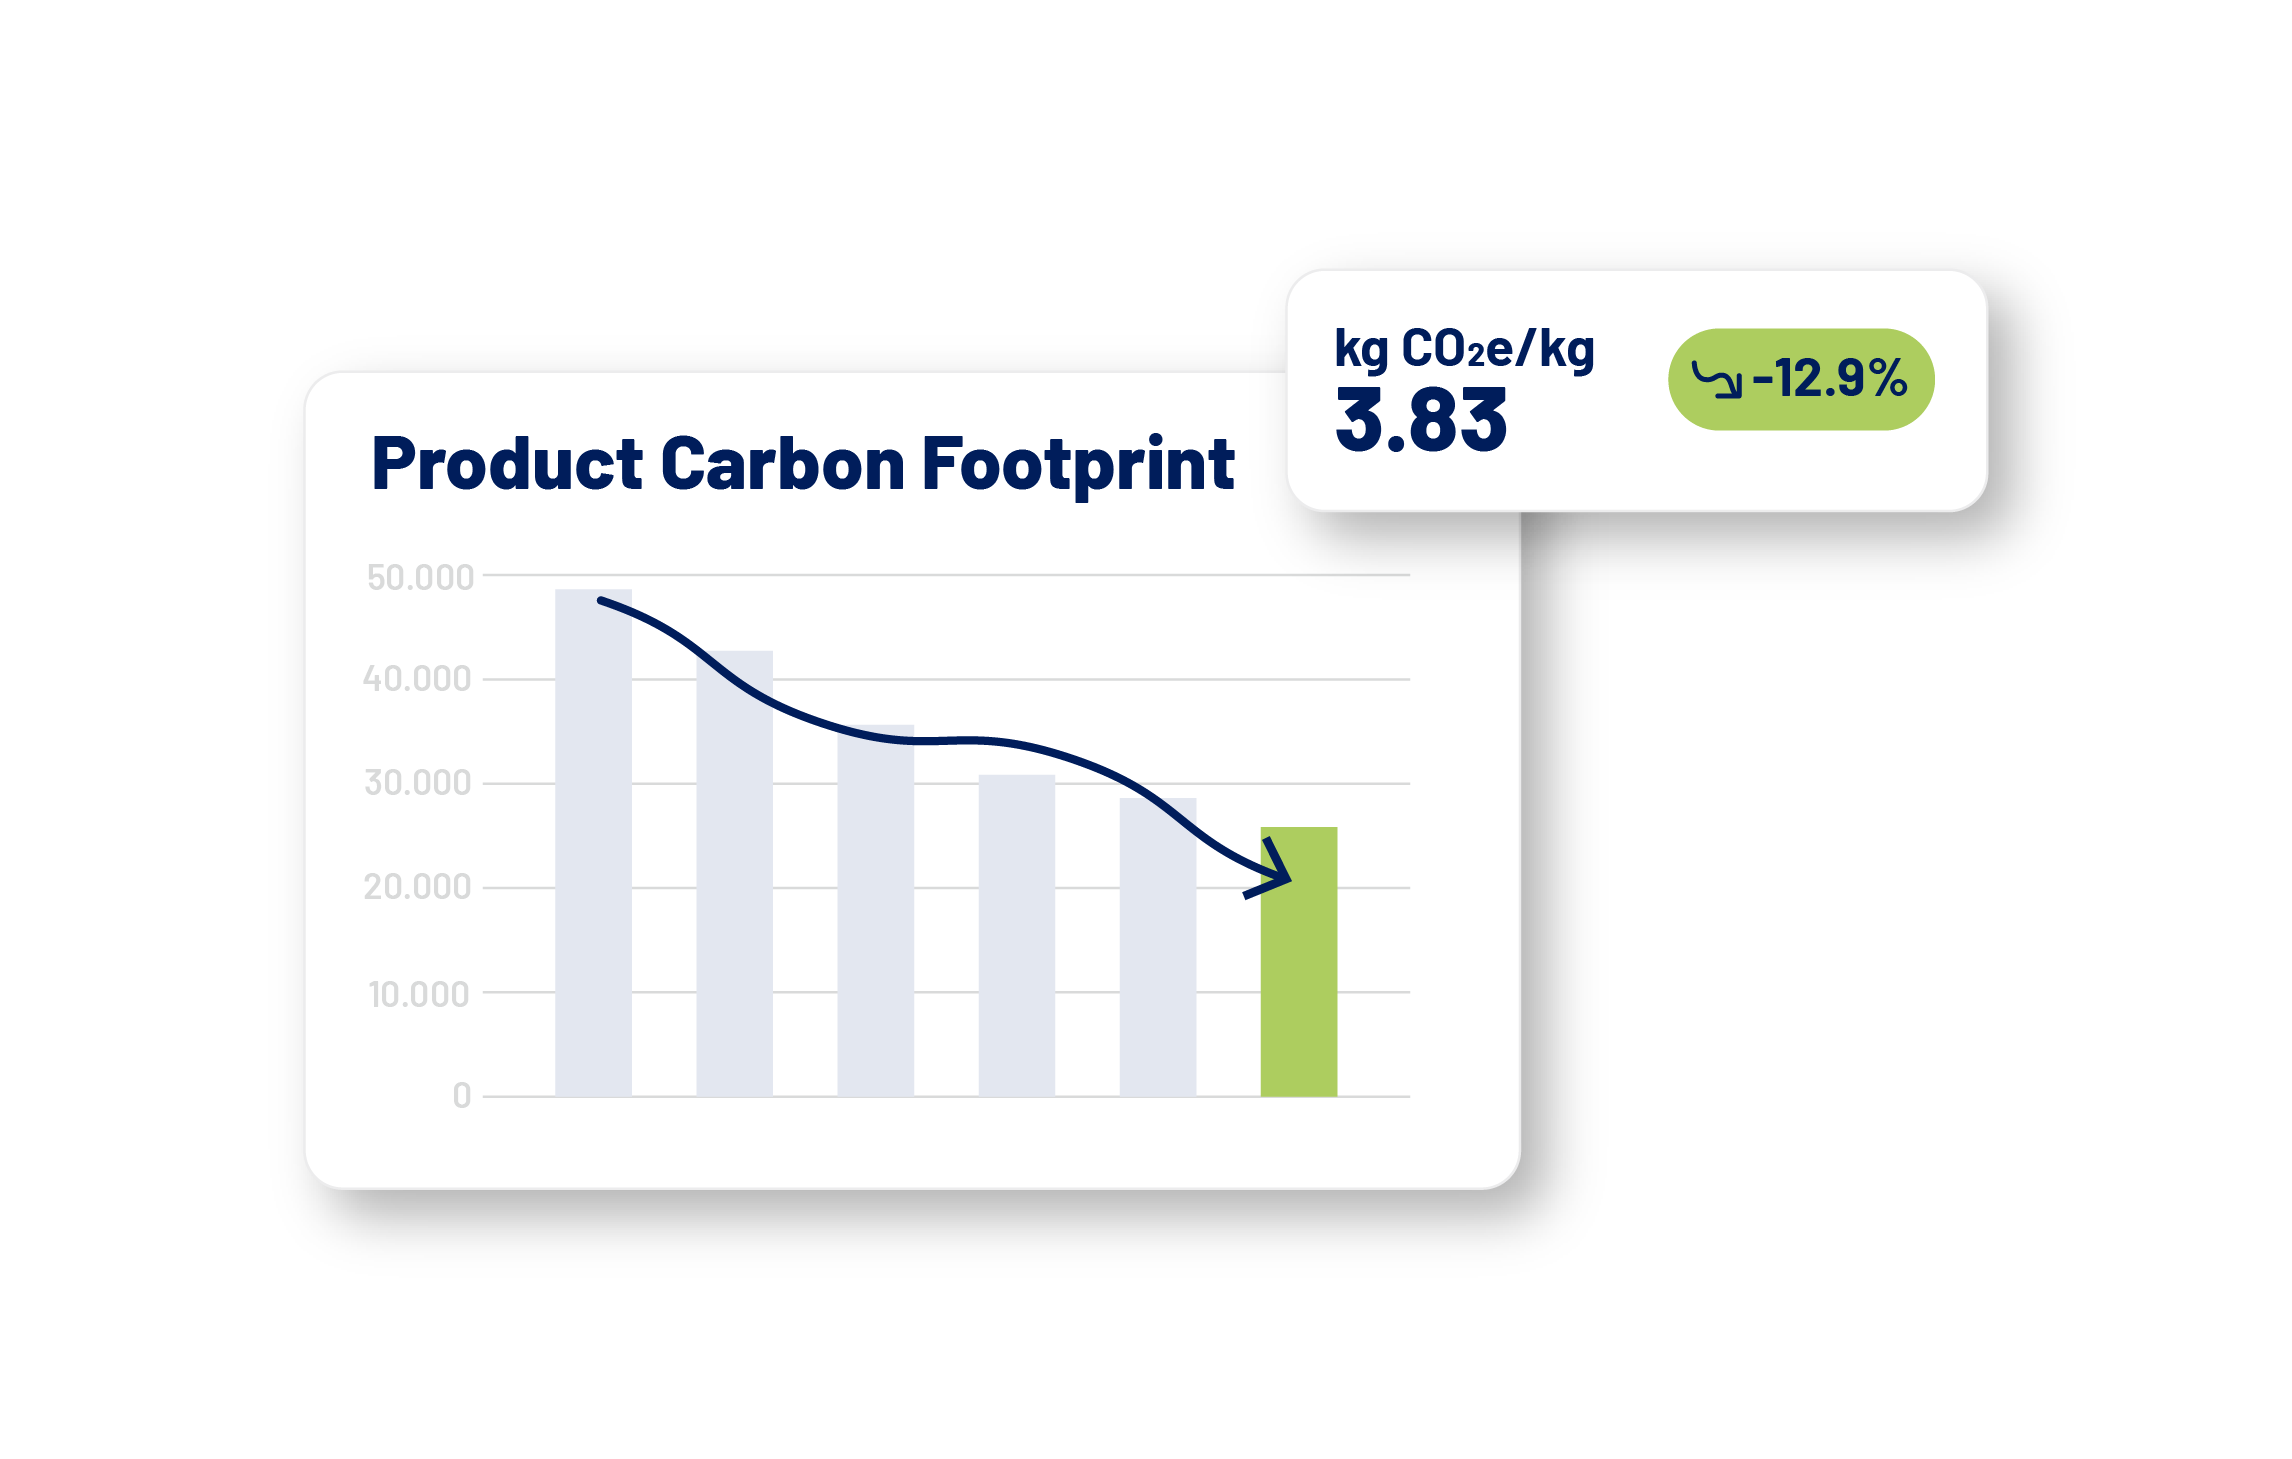 Infographic showing decreasing product carbon footprint